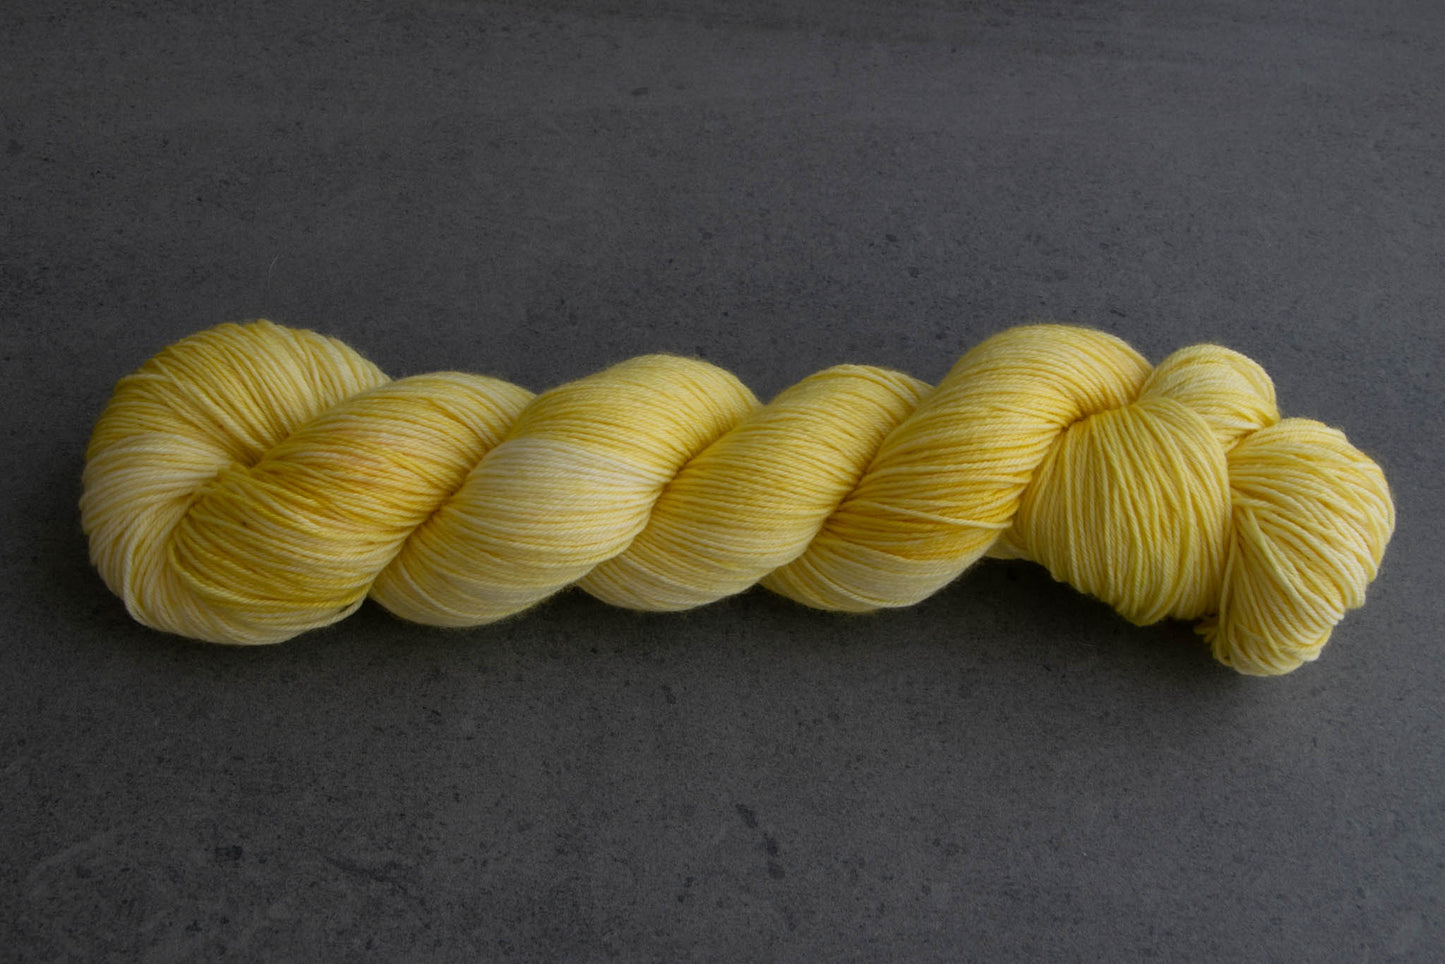 A skein of cheery yellow hand-dyed yarn.